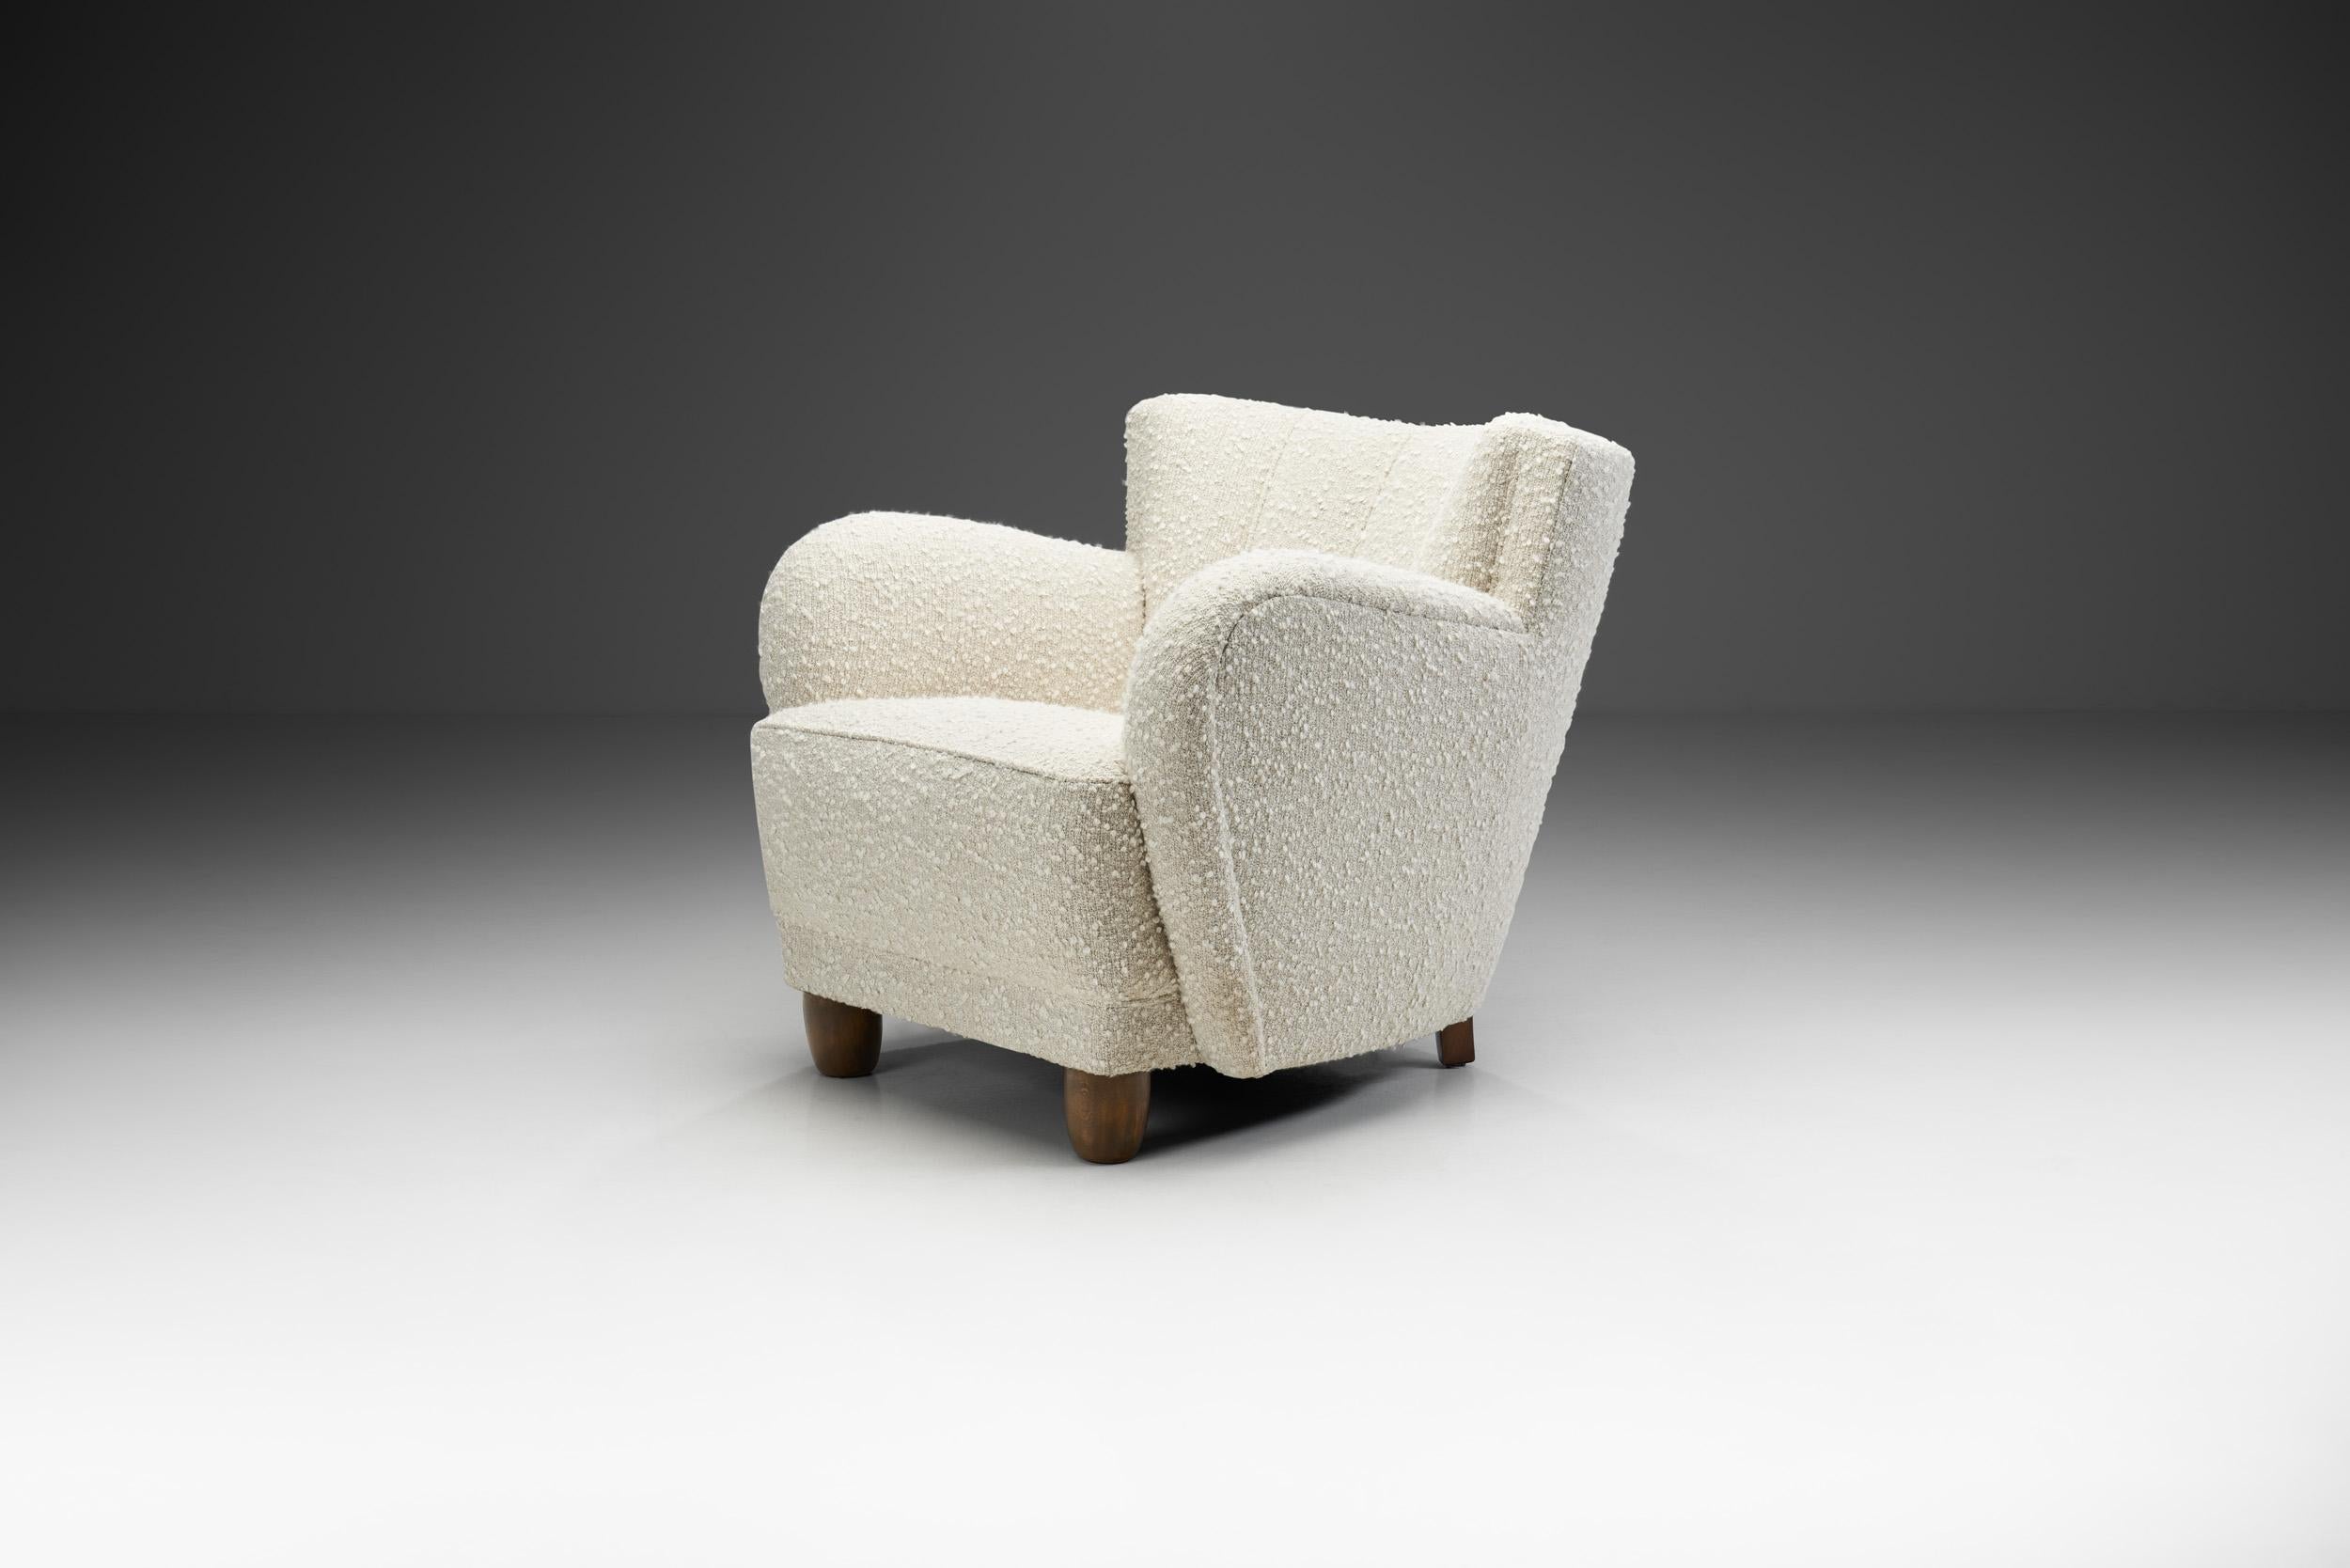 This early Danish mid-century armchair is a great example of the unification of comfort and delicate design elements. The touch of Danish Modernism is recognizable in the exquisite materials, the craftsmanship, and in the elegantly curved and